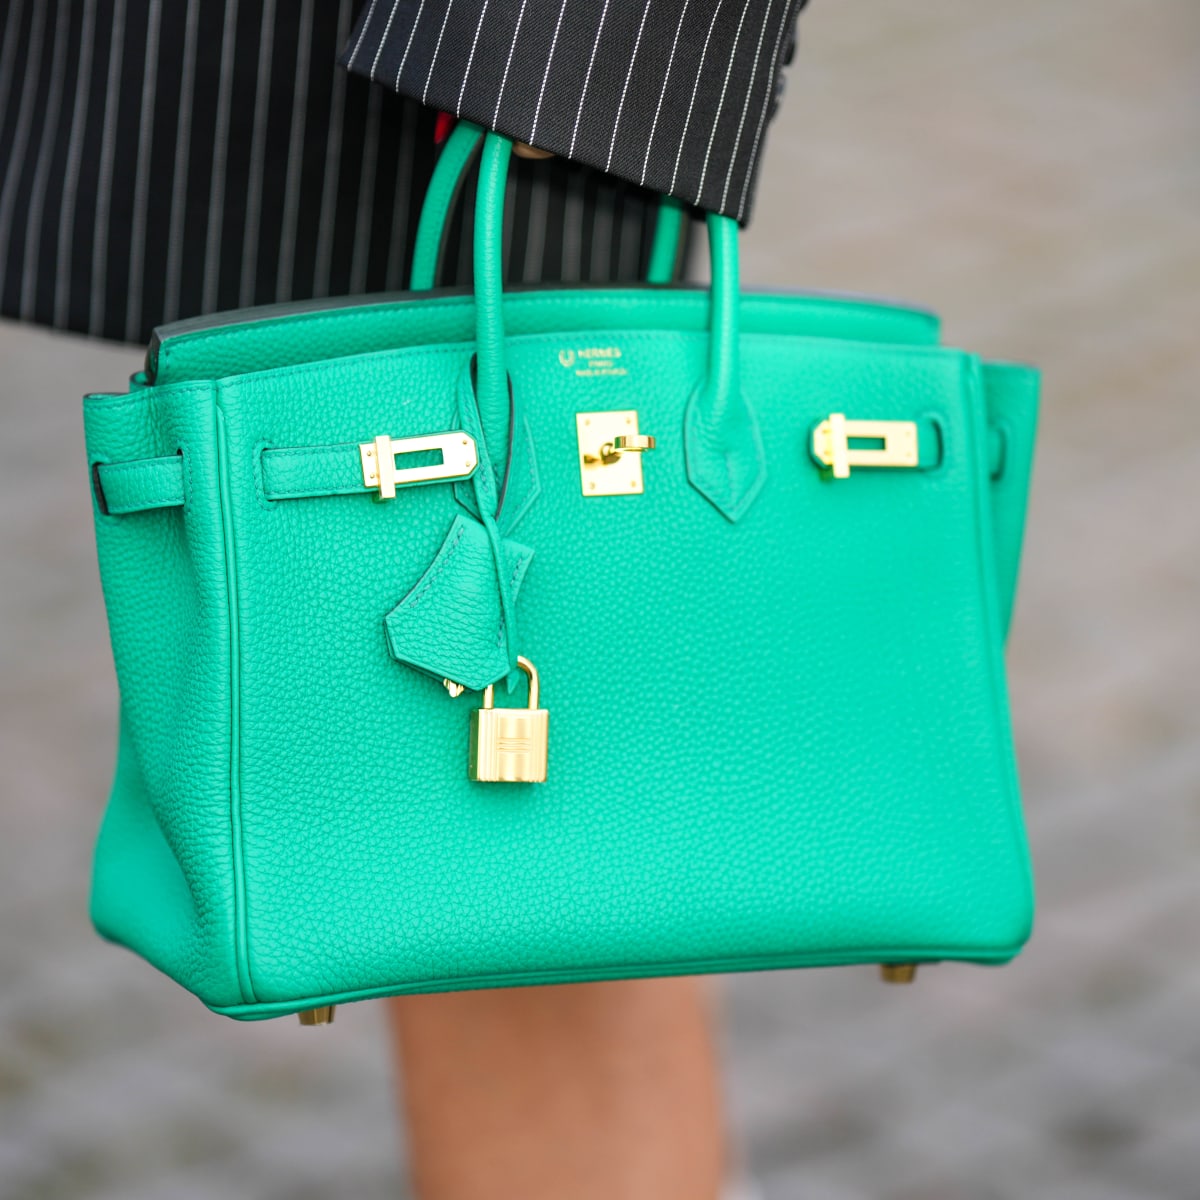 What happens when we sent ordinary women to ask for a Hermes handbag